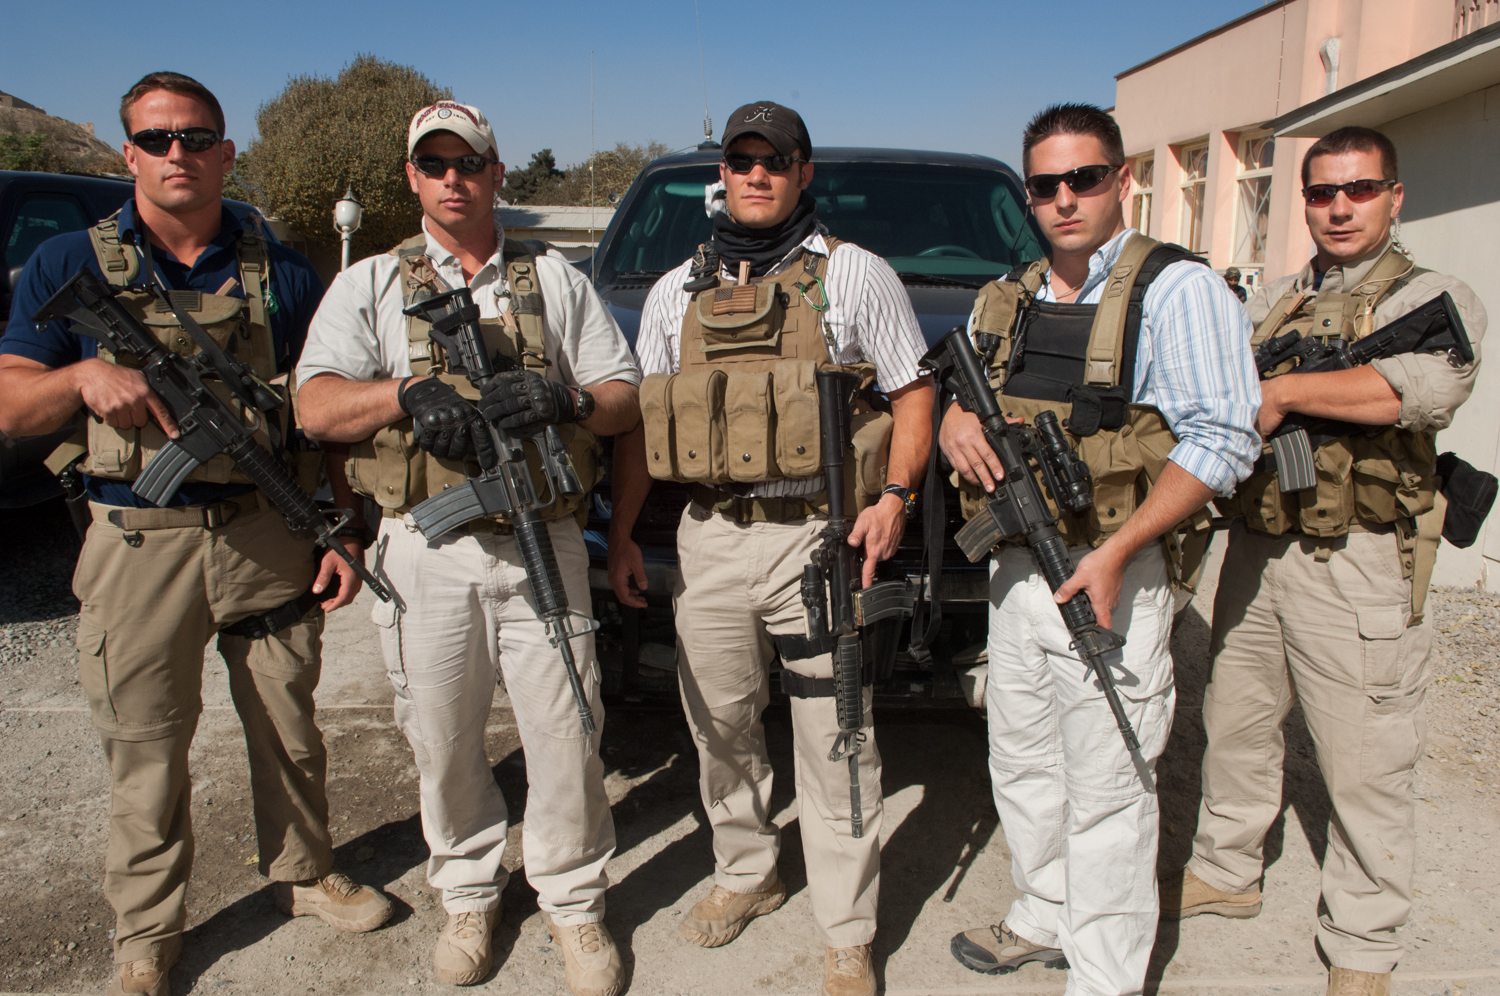  Private security contractors (L to R) Pat Scott, Mike Stocksett, 32, Neil Gary, 26, Matt Goss, 24, and Kyle Kaszynski, 39, pose for a photograph while on a break from providing security in Kabul, Afghanistan. These men work for the private military 